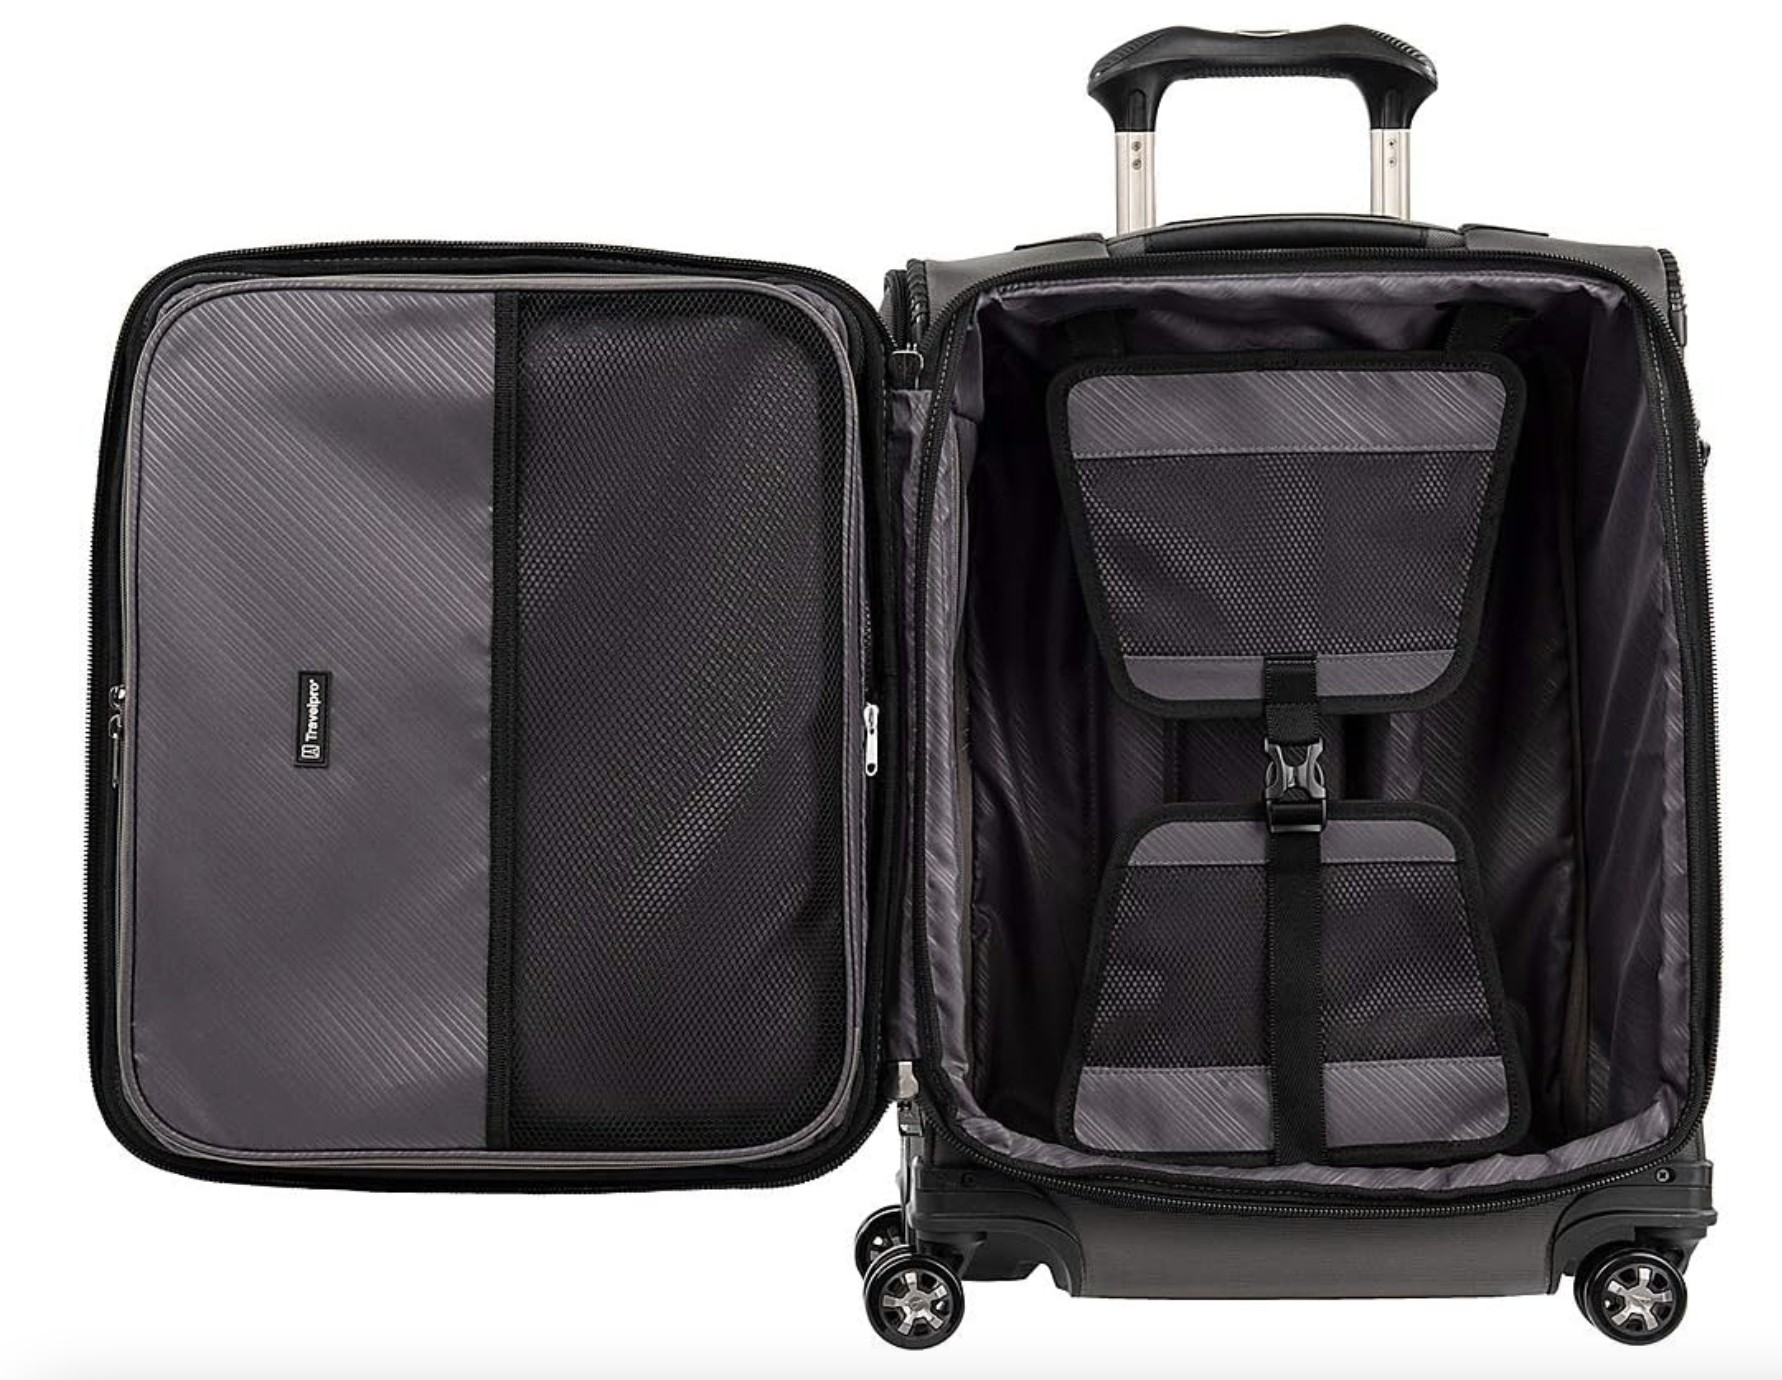 Travelpro Carry-on Luggage